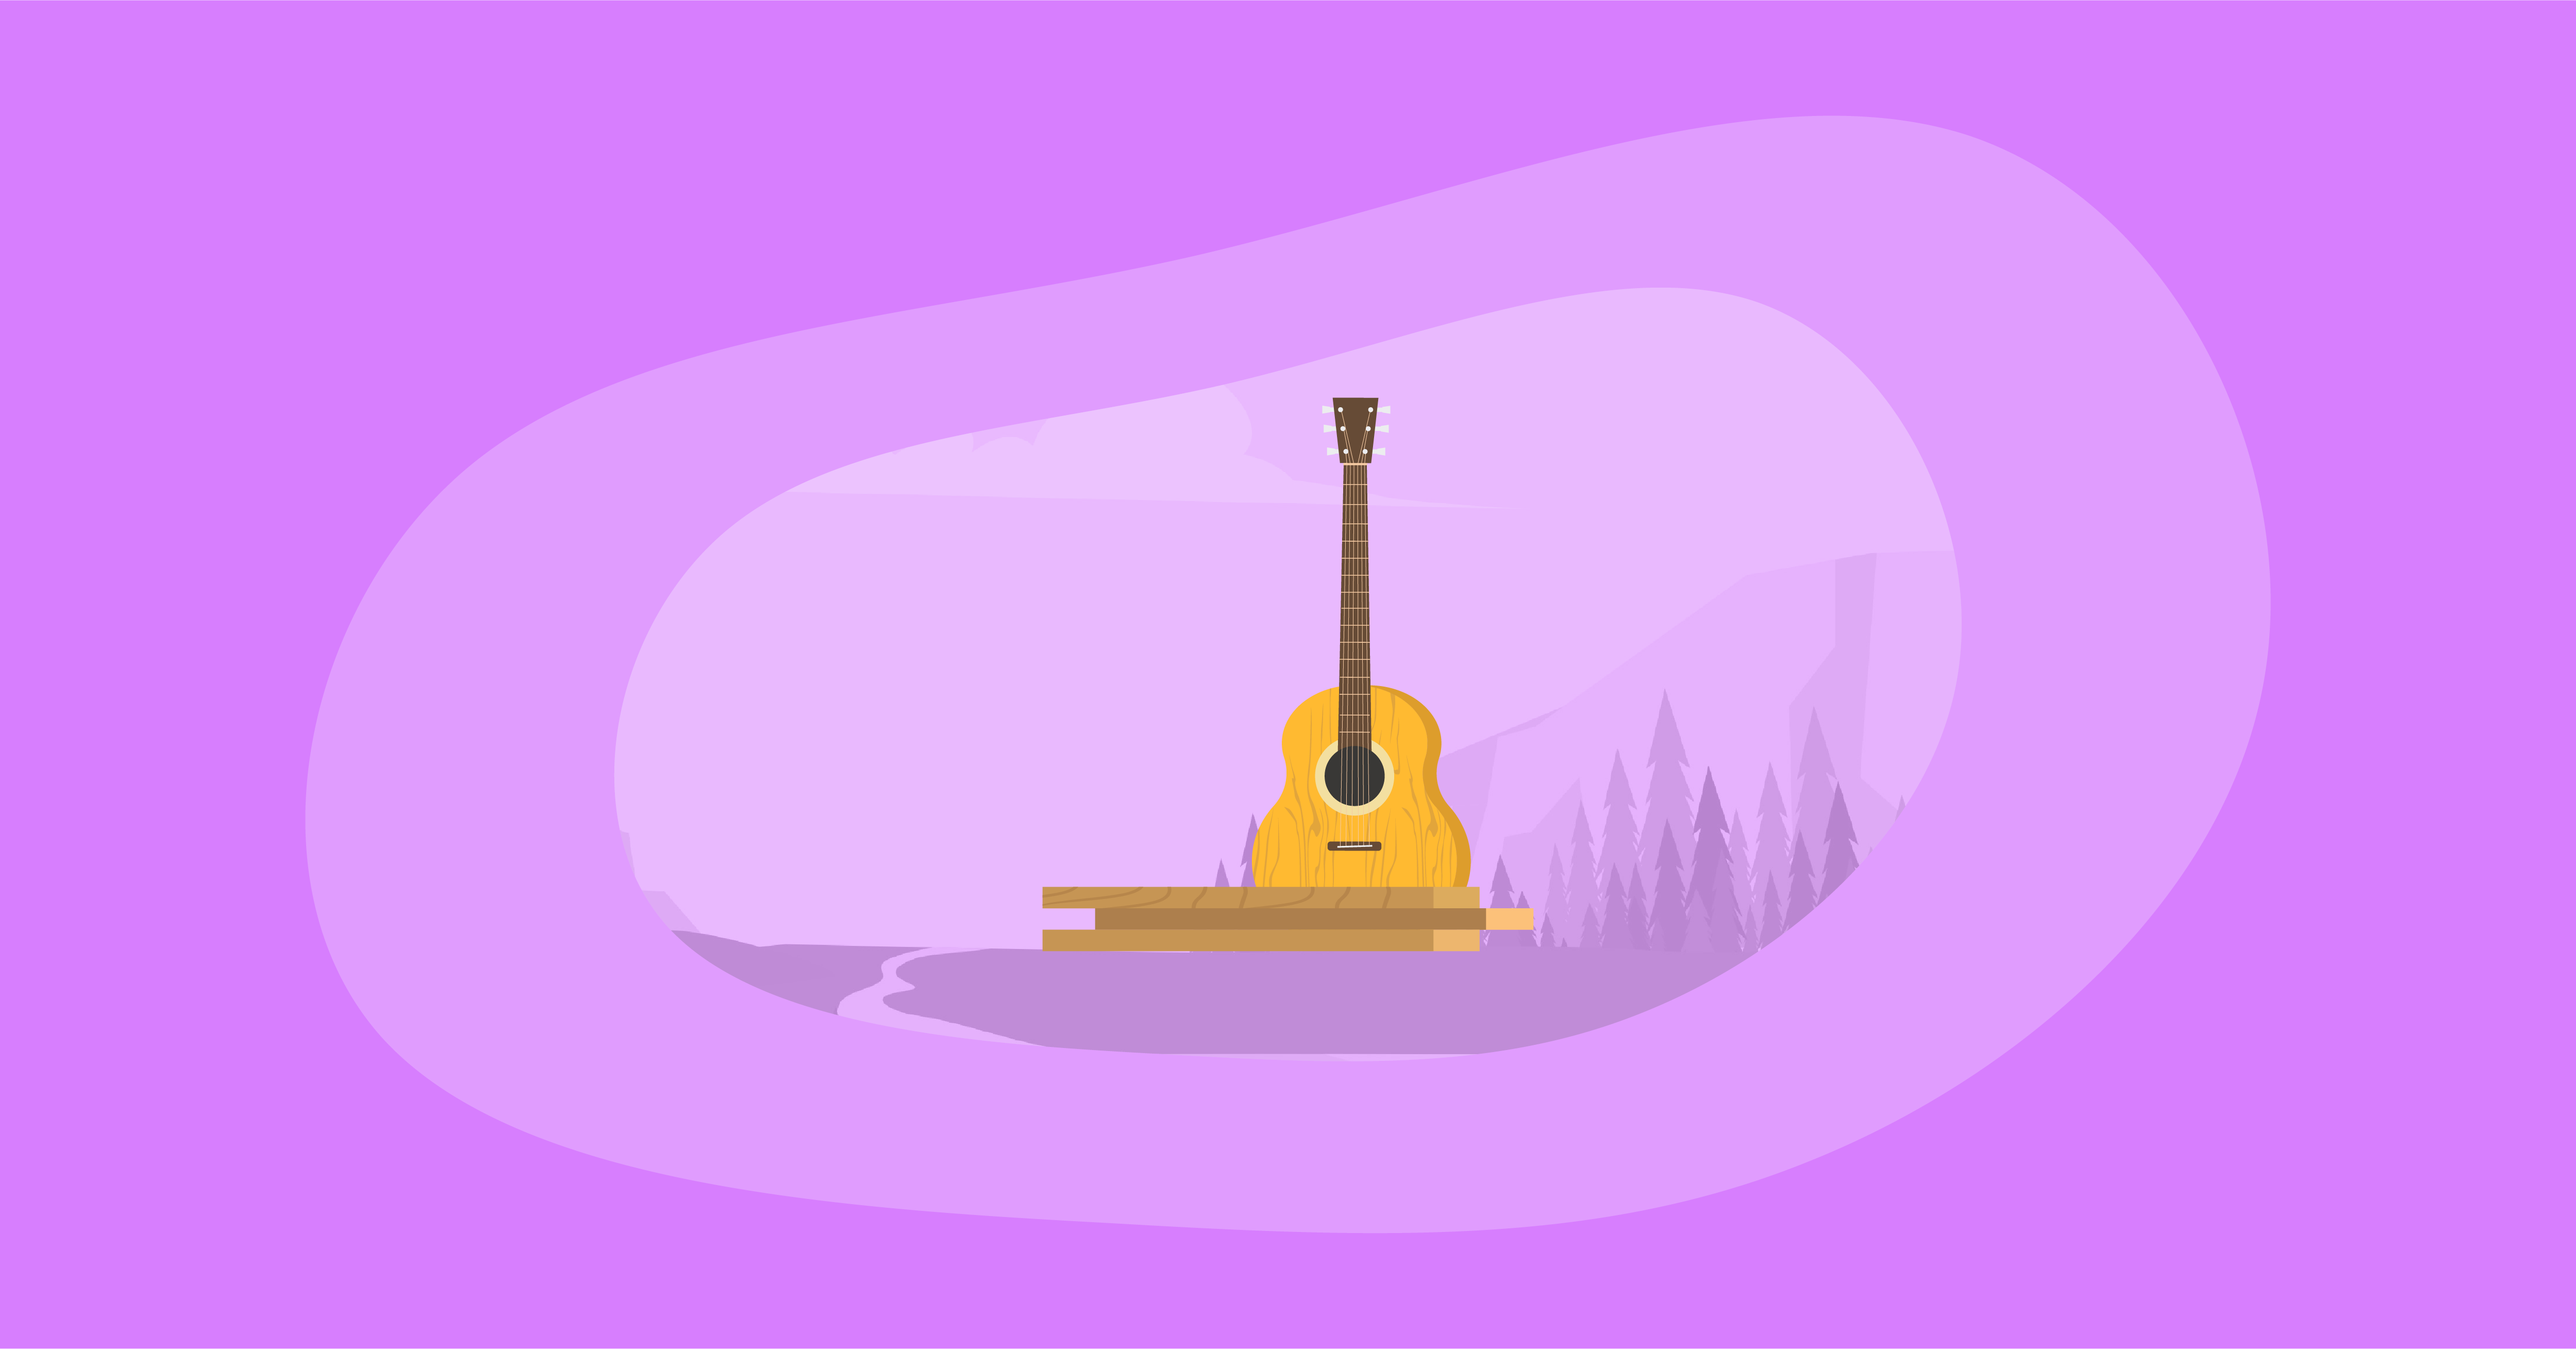 Illustration of a wooden guitar and tonewood